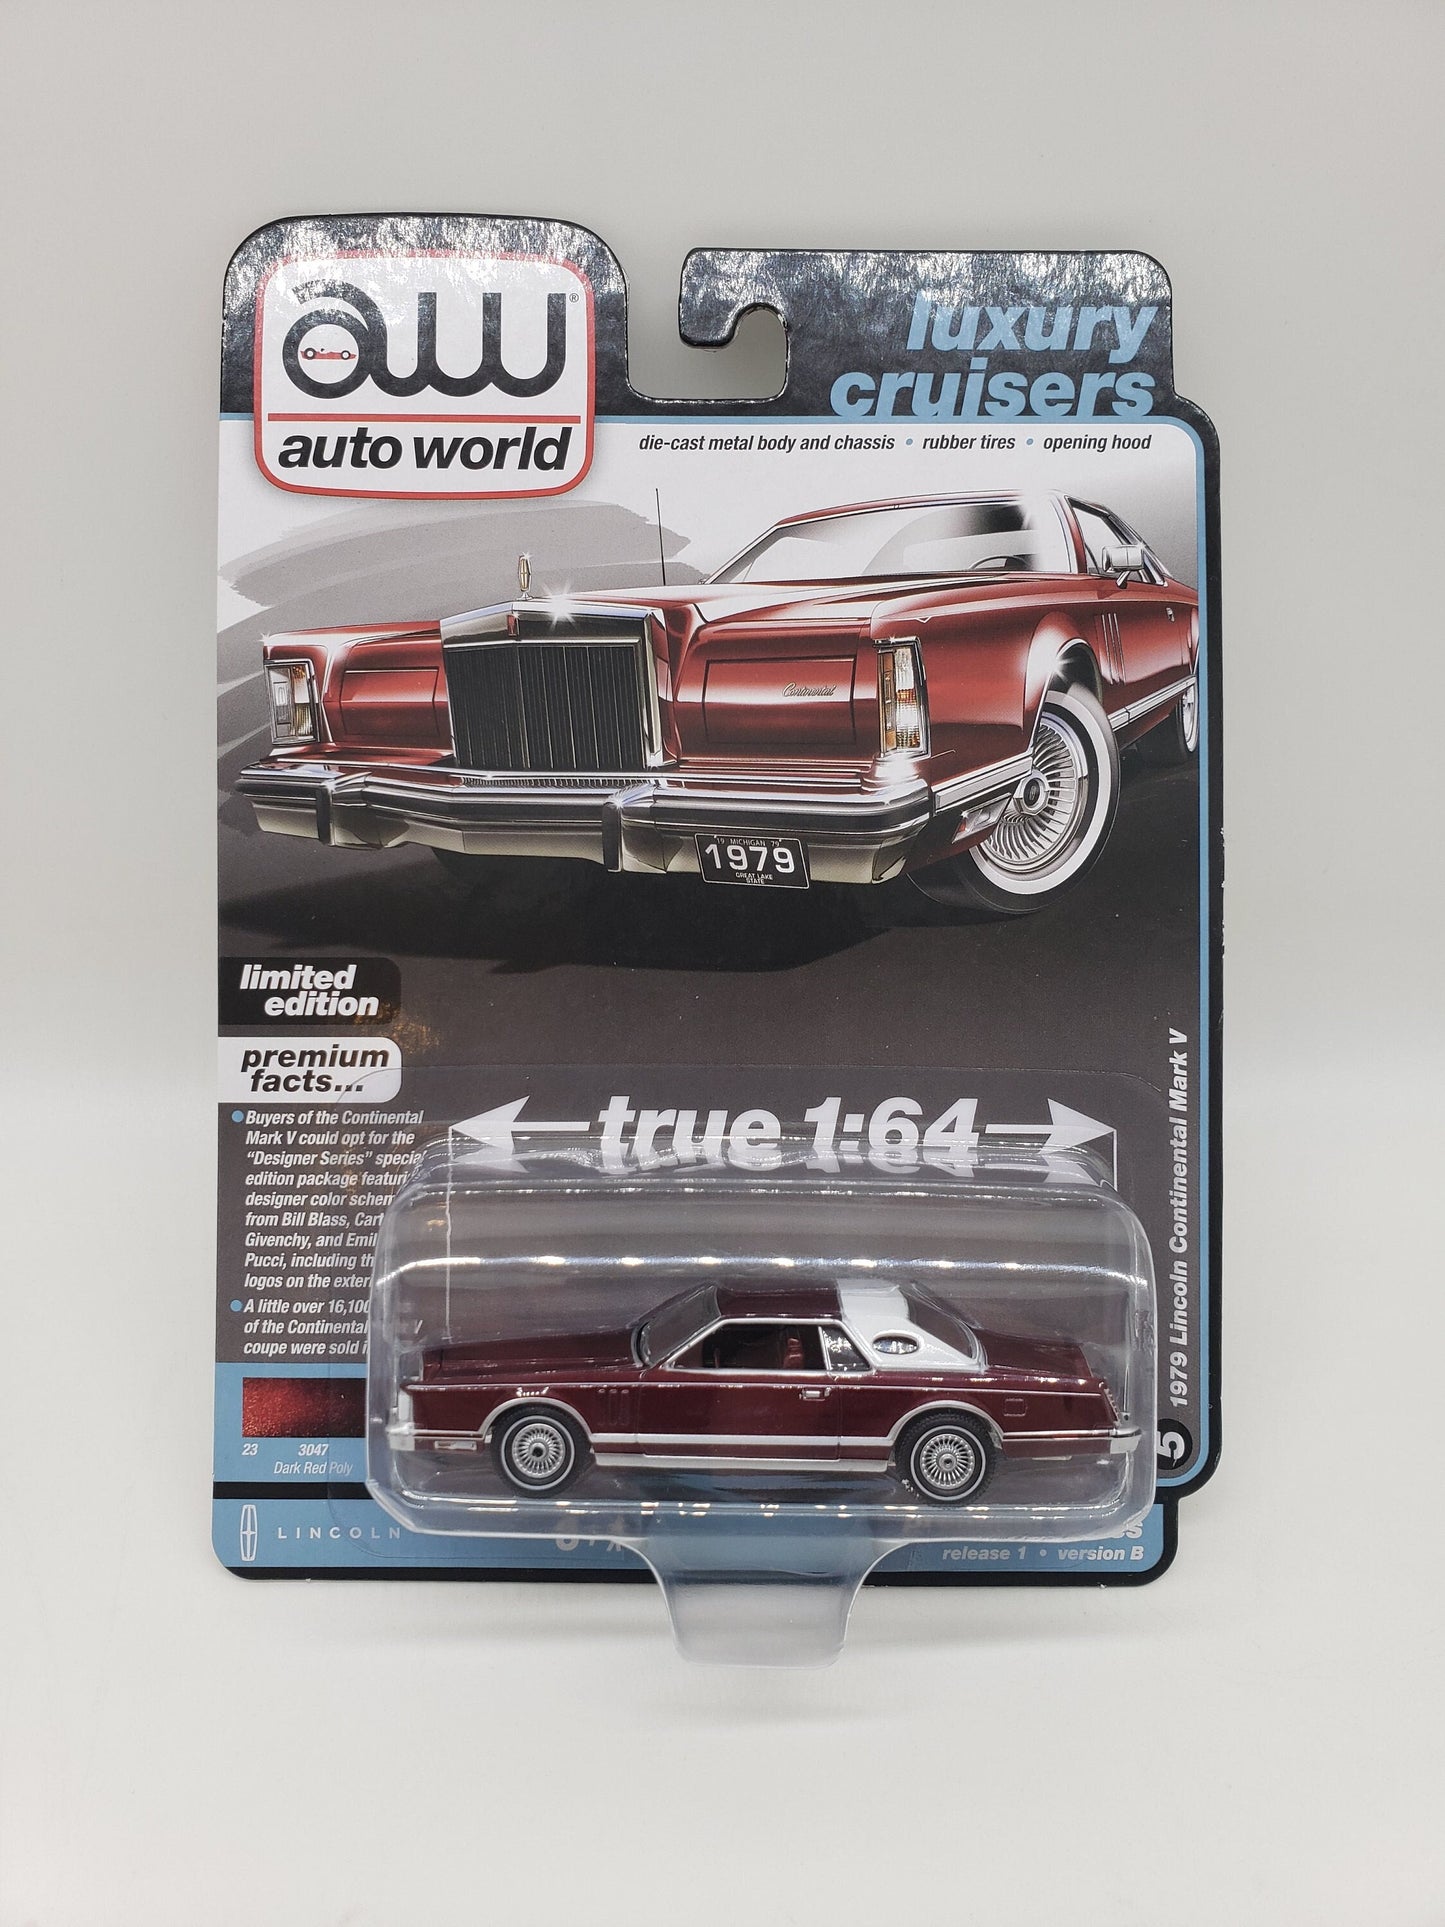 Autoworld 1979 Lincoln Continental Mark V Burgundy Limited Edition Collectable Scale Model Miniature Toy Car Perfect Birthday Gift